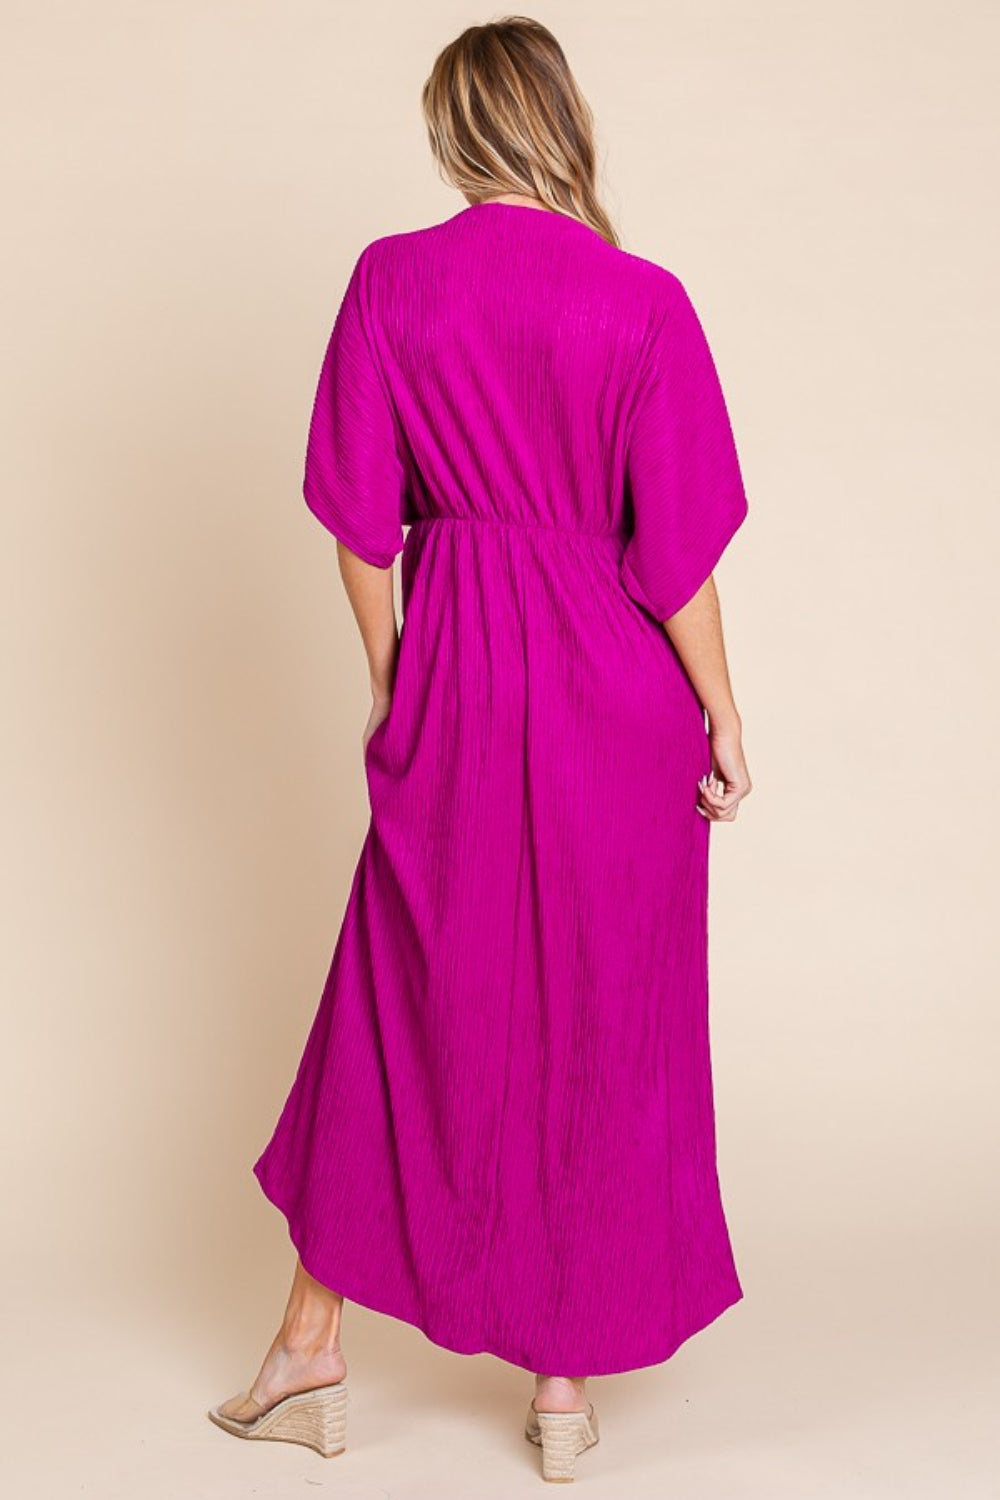 Hot Pink Surplice Maxi Dress with Pockets